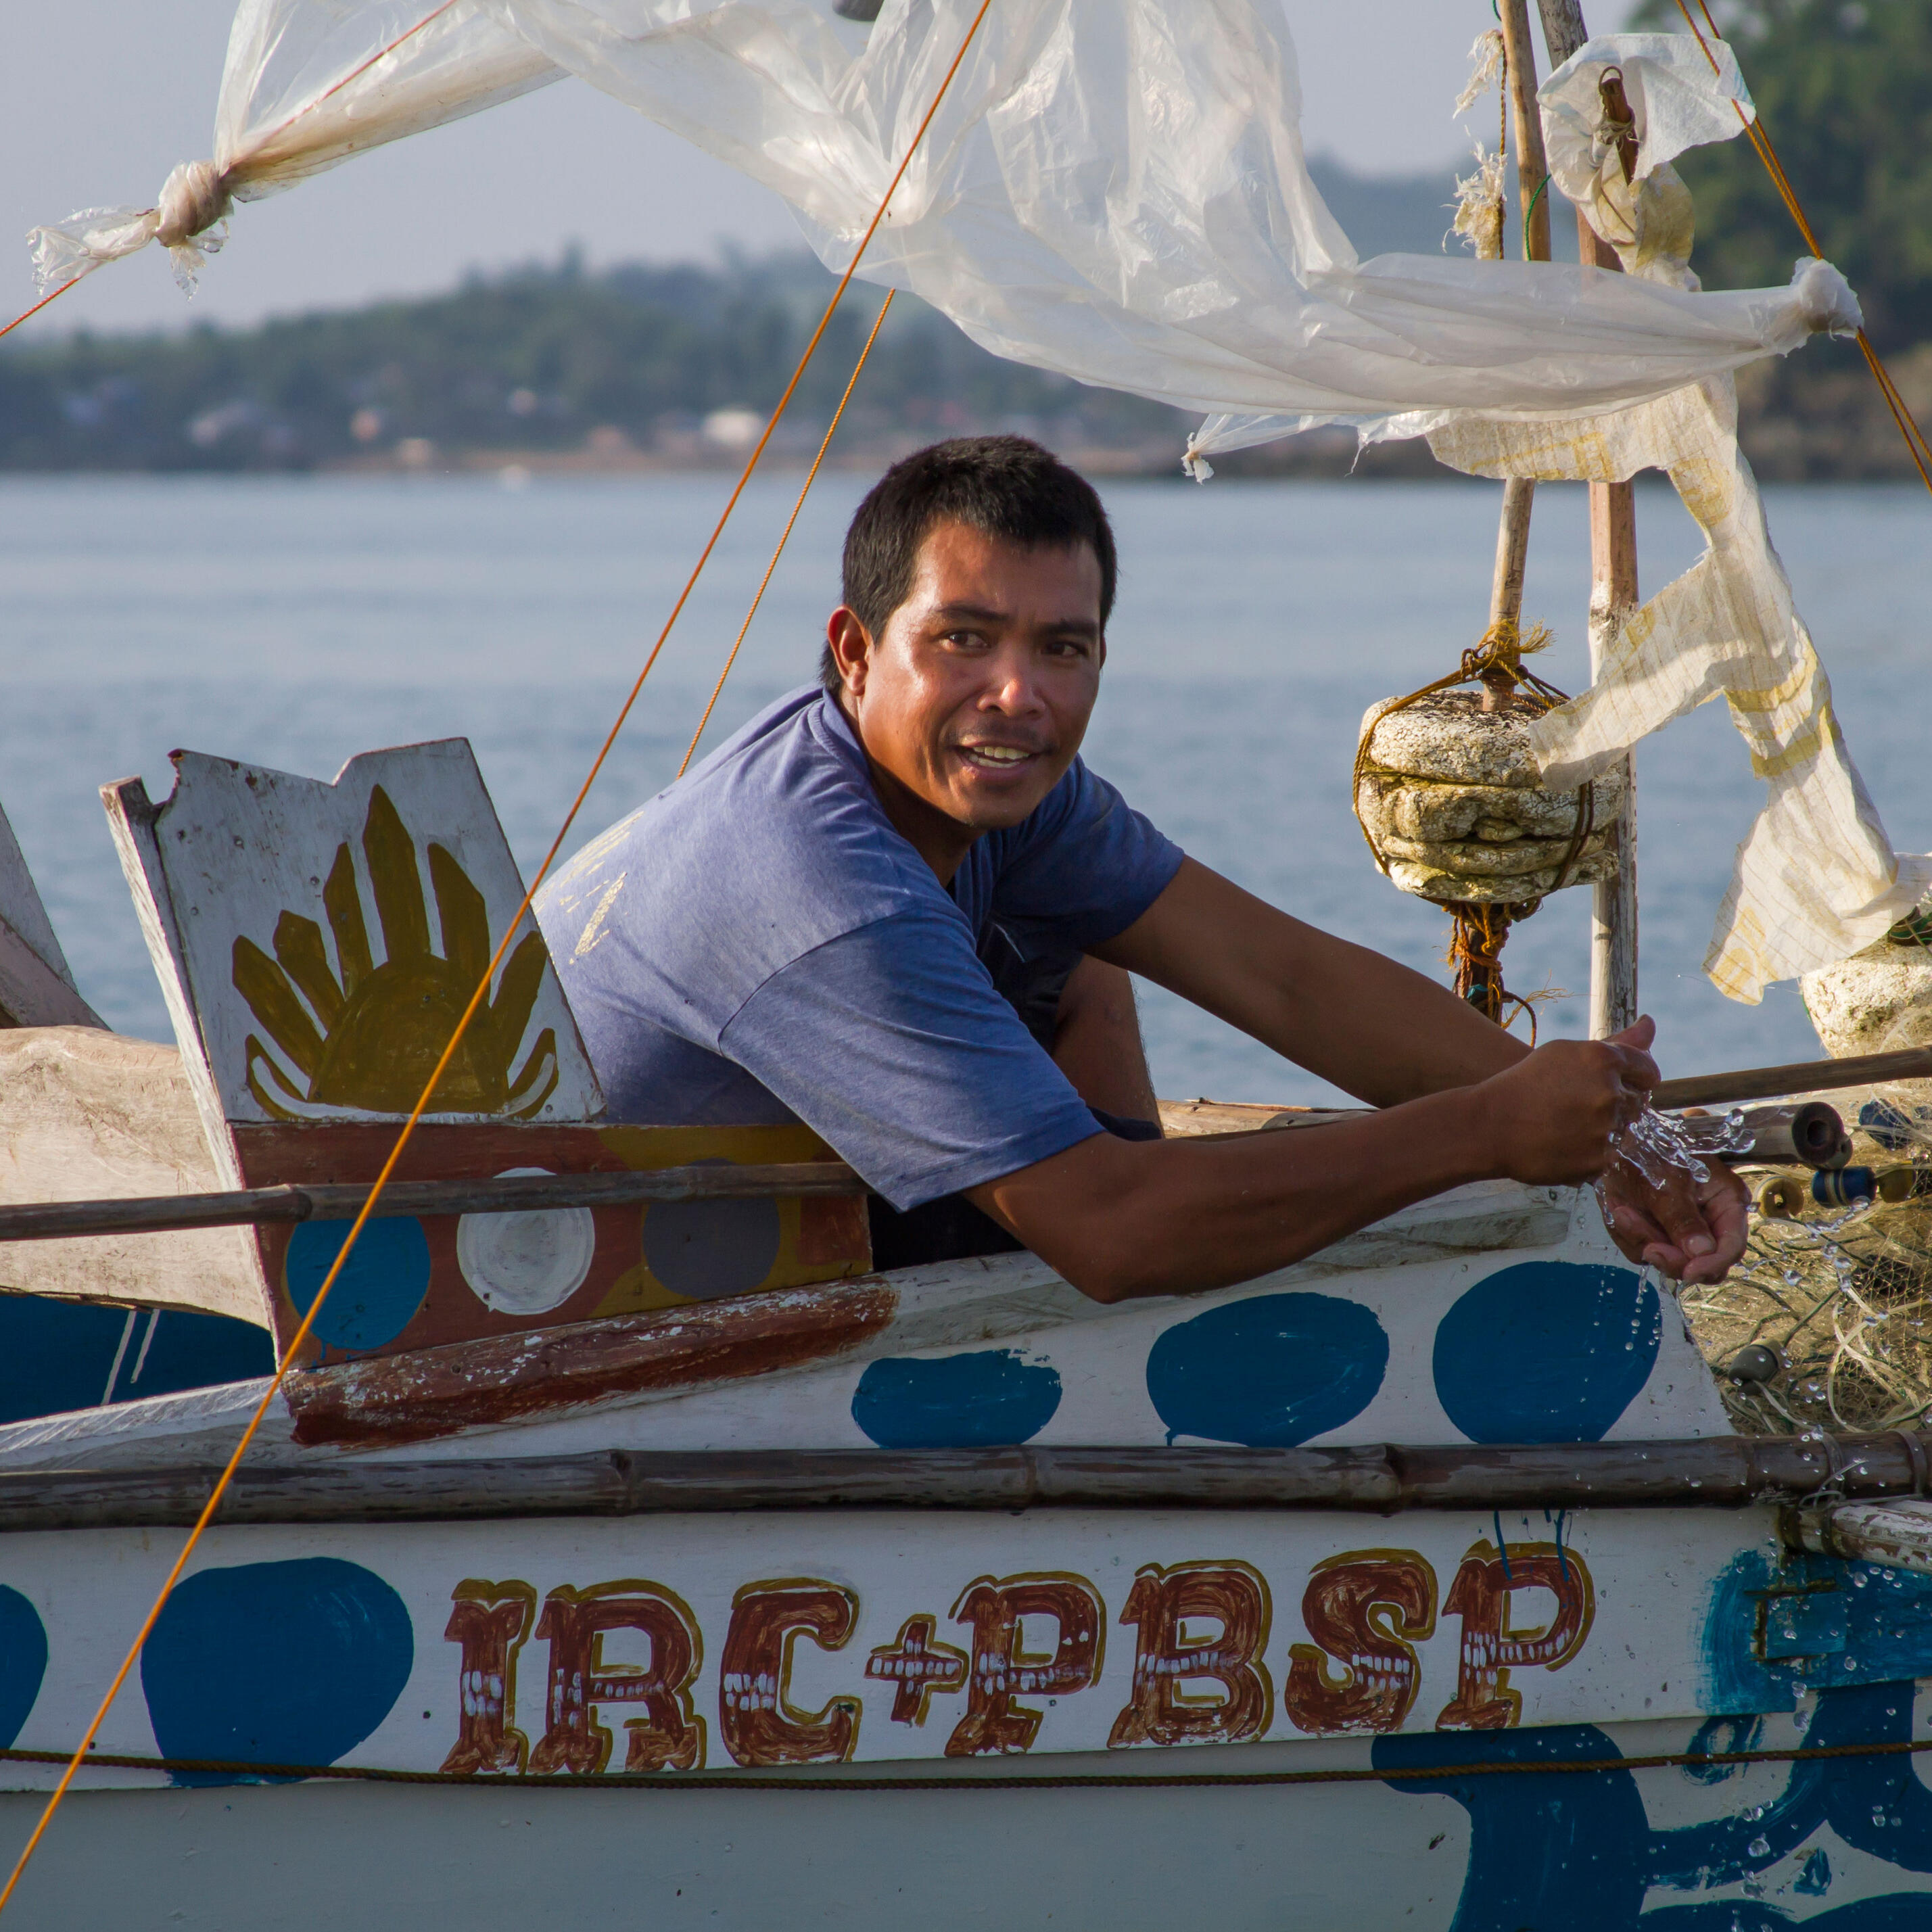 A Filipino fisherman sits in his boat on the water.